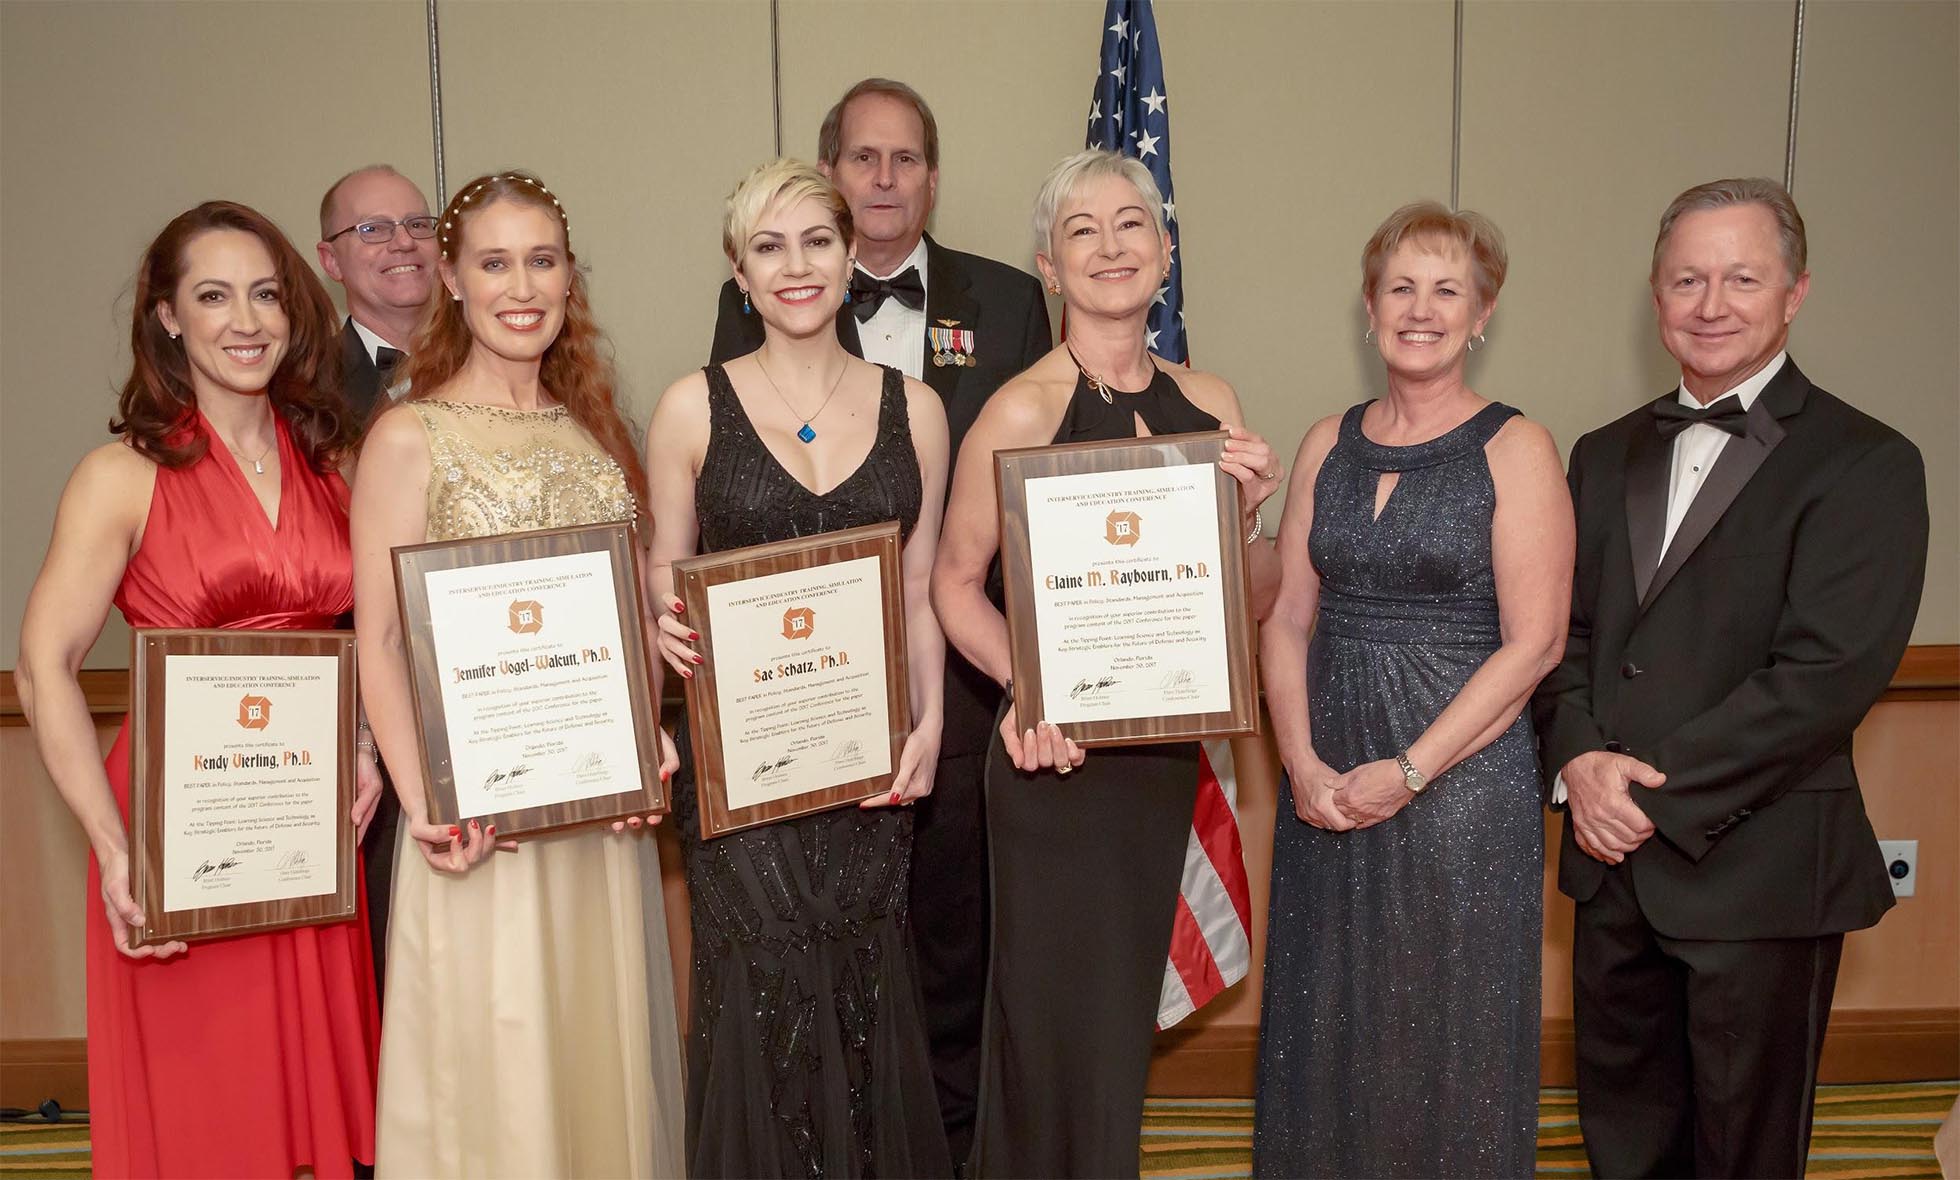 The authors receiving their "Best Policy Subcommittee Paper" award, left to right: Kendy Vierling, Ph.D., Jennifer "JJ" Vogel-Walcutt, Ph.D., Sae Schatz, Ph.D., and Elaine M. Raybourn, Ph.D. with the IITSEC 2017 Leadership.